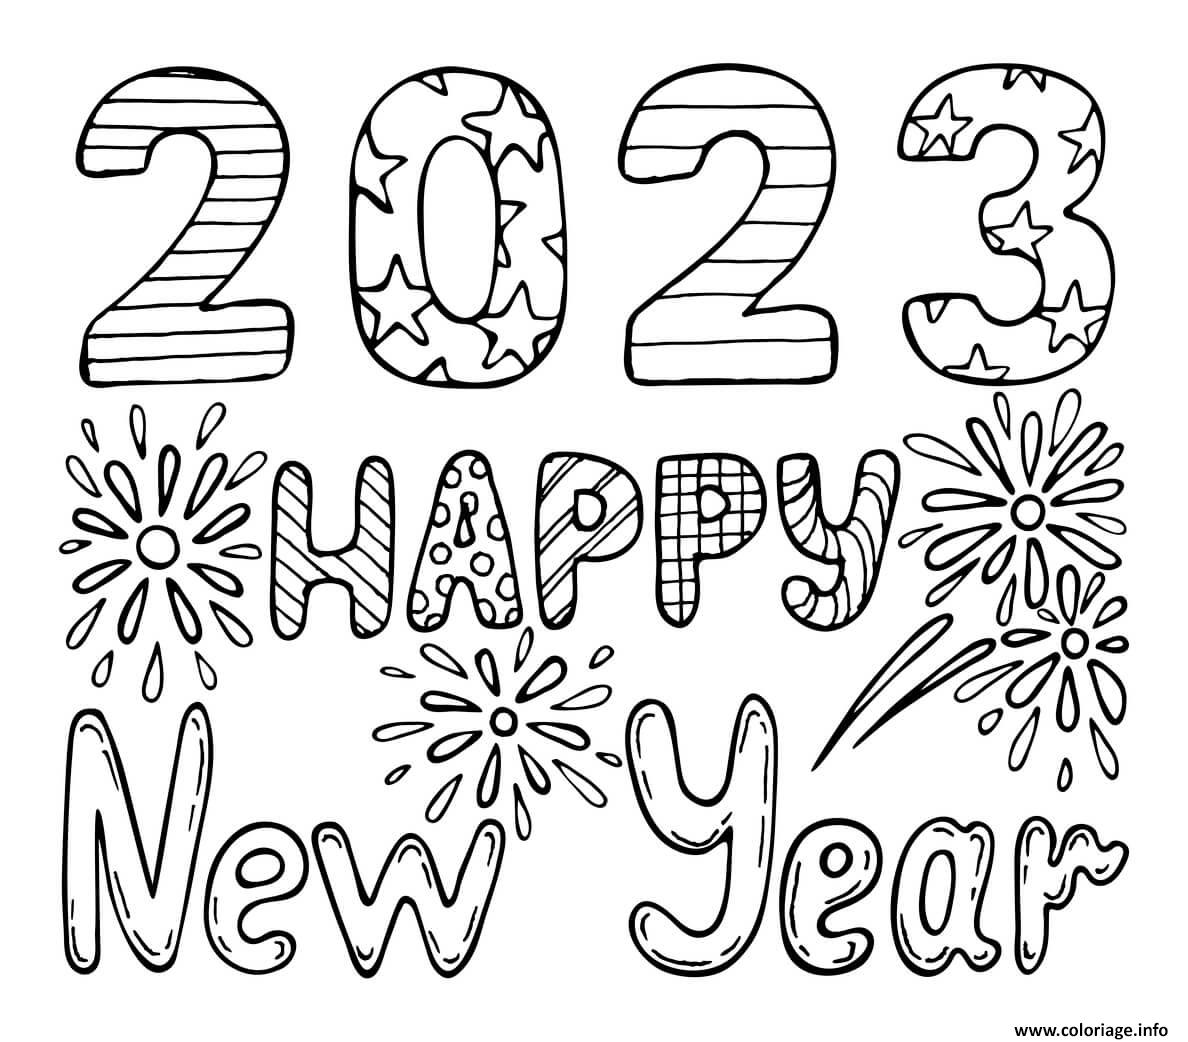 Coloriage 2023 happy new year stars - JeColorie.com